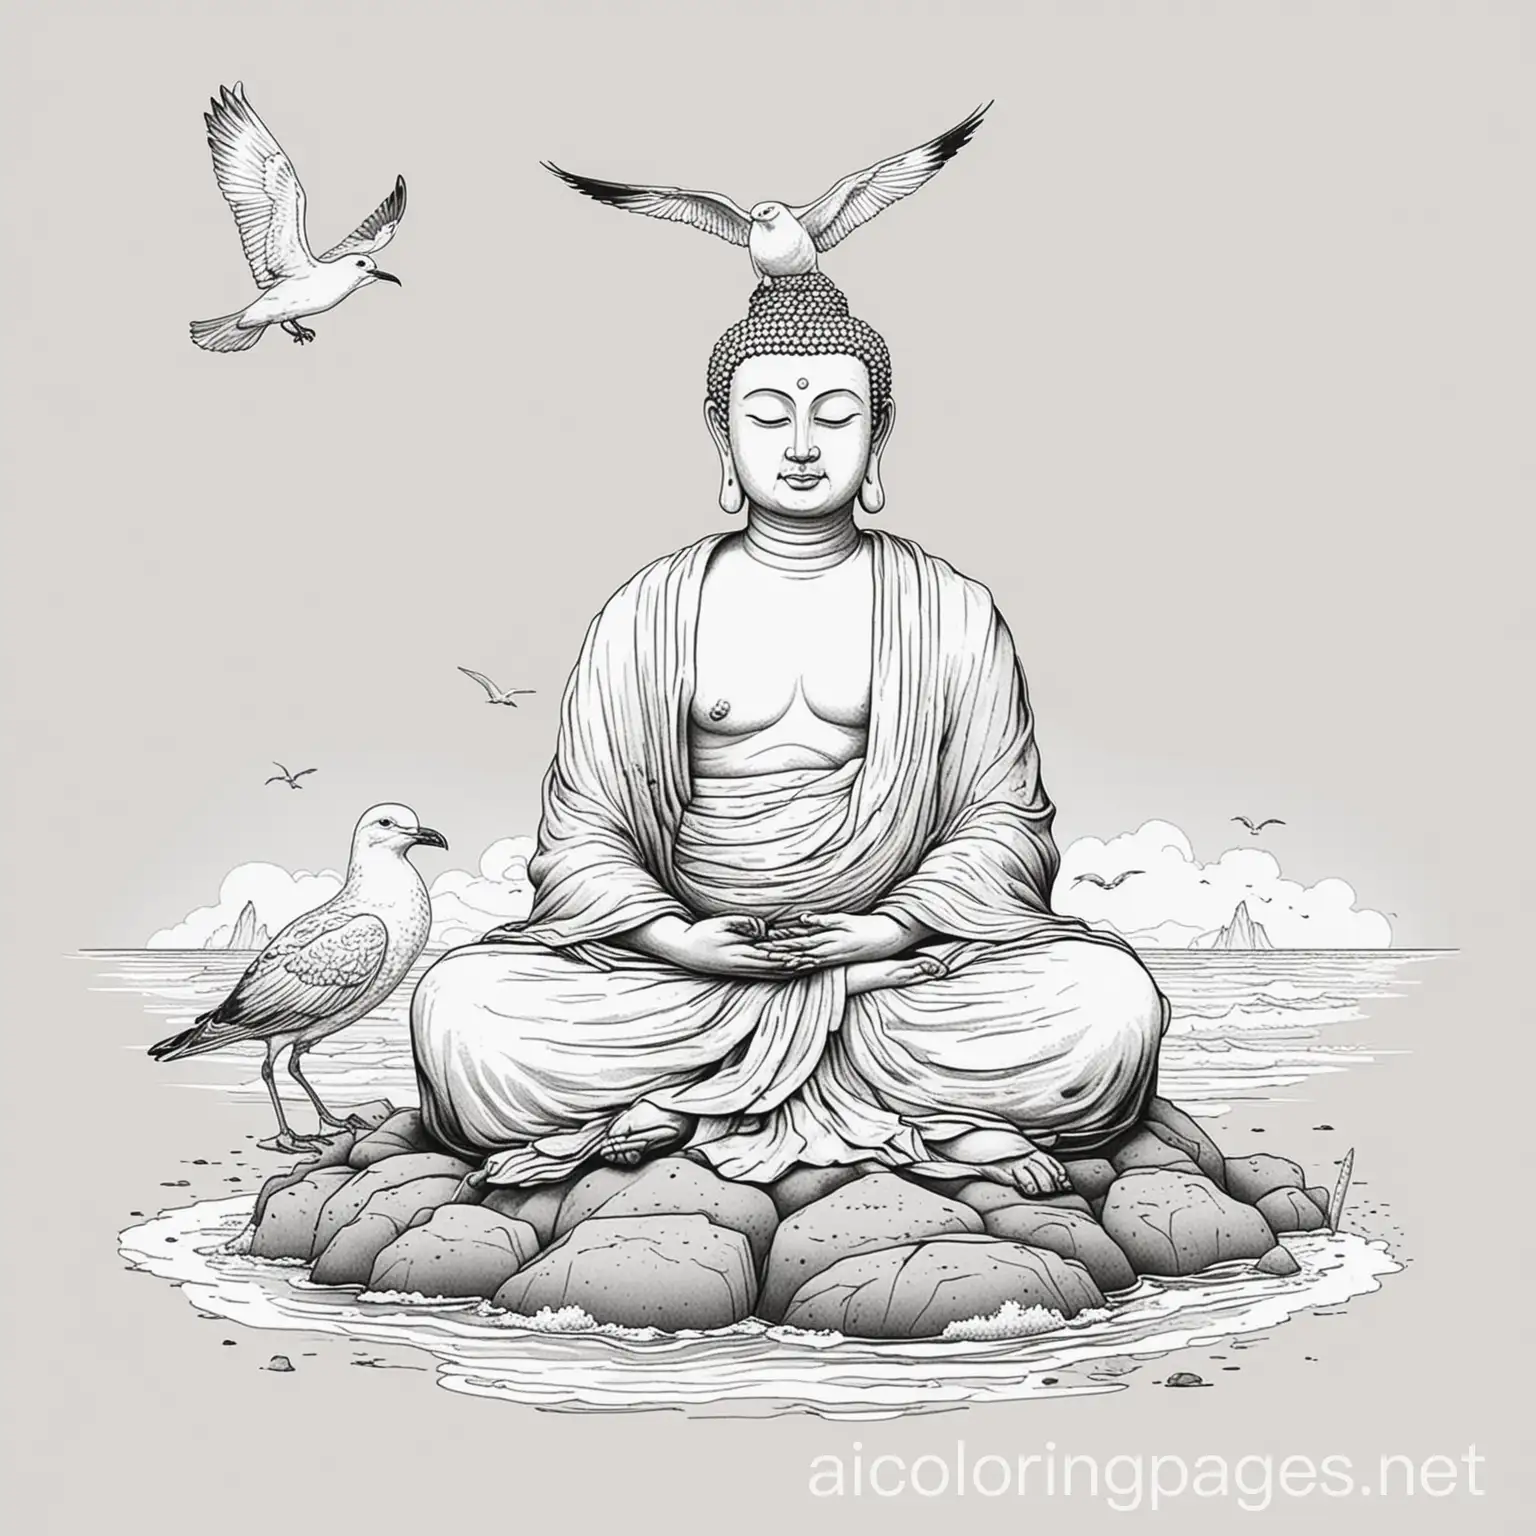 Buddha-Sitting-on-Beach-with-Seagull-Coloring-Page